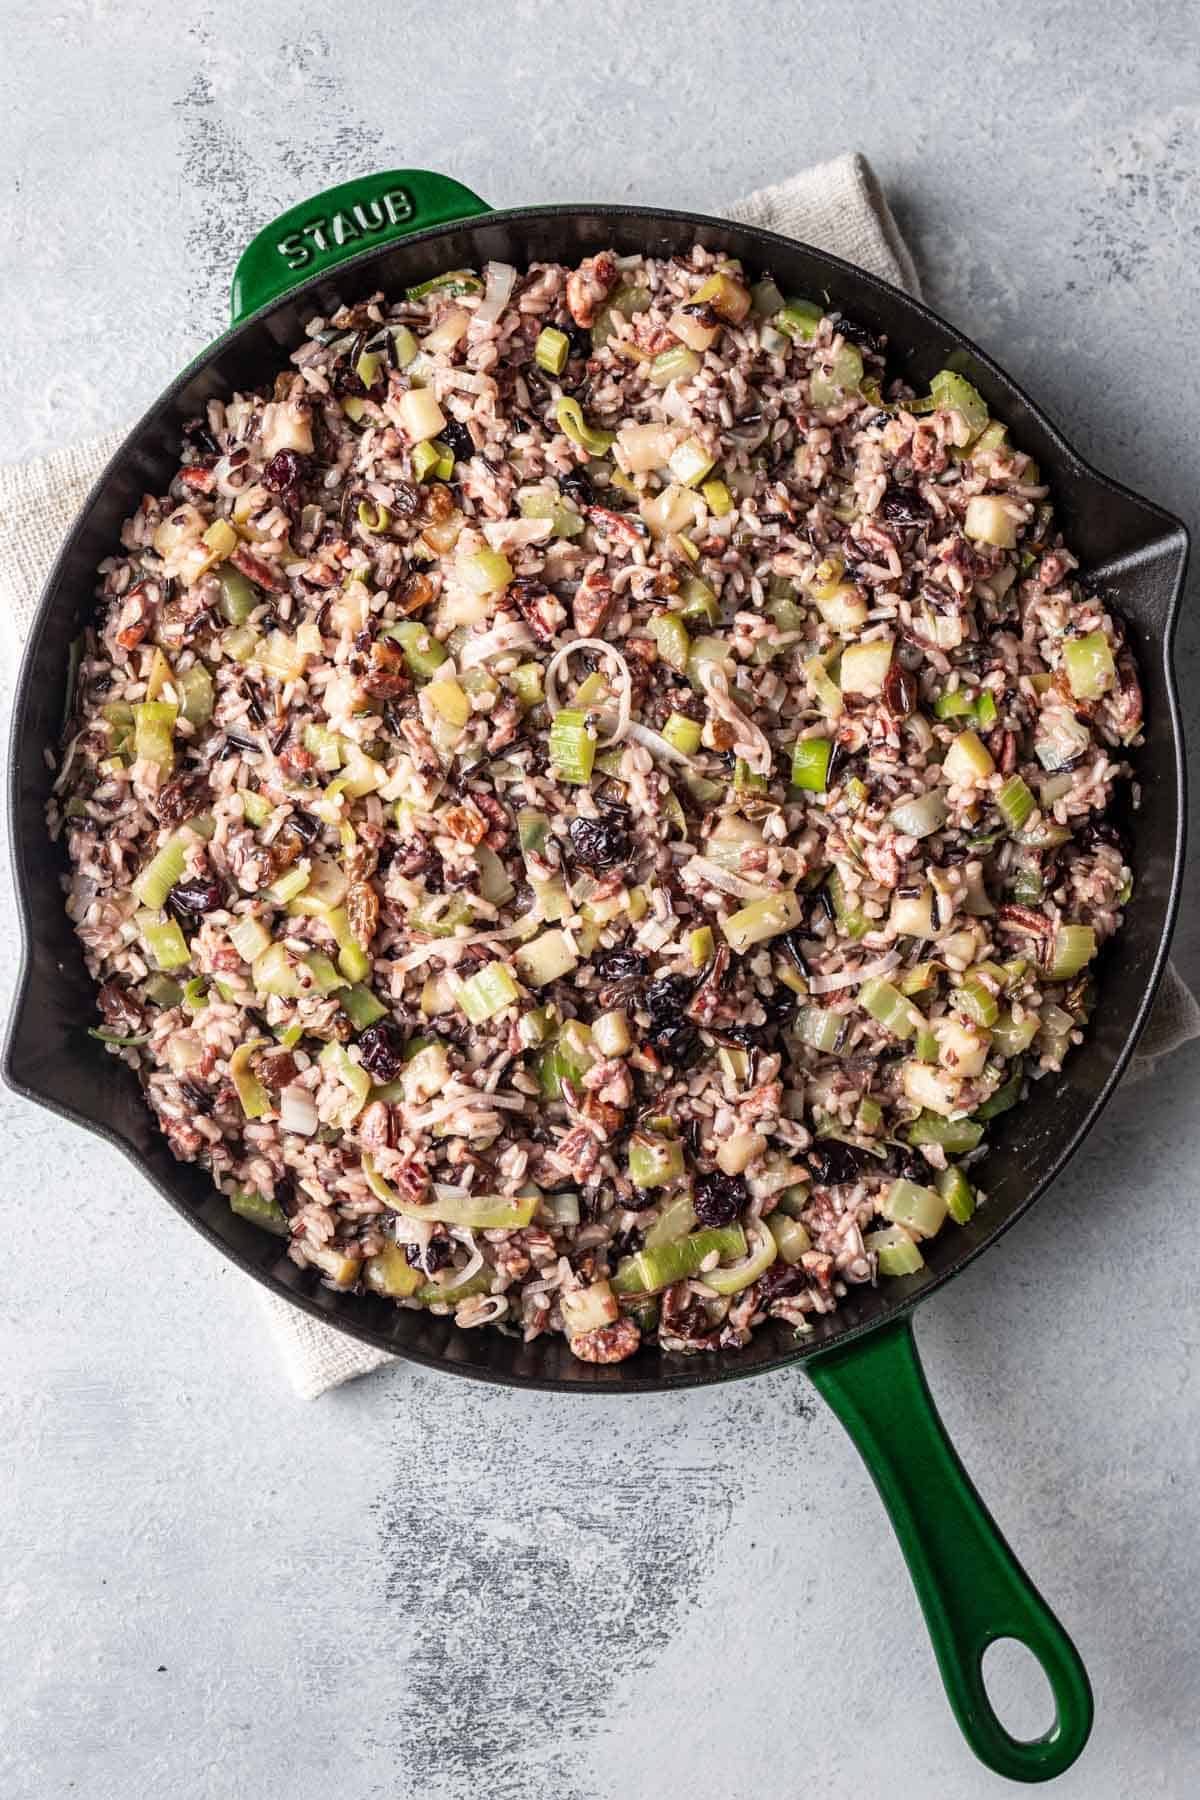 Cooked wild rice with seasonings, golden raisins, dried cranberries, and pecans.